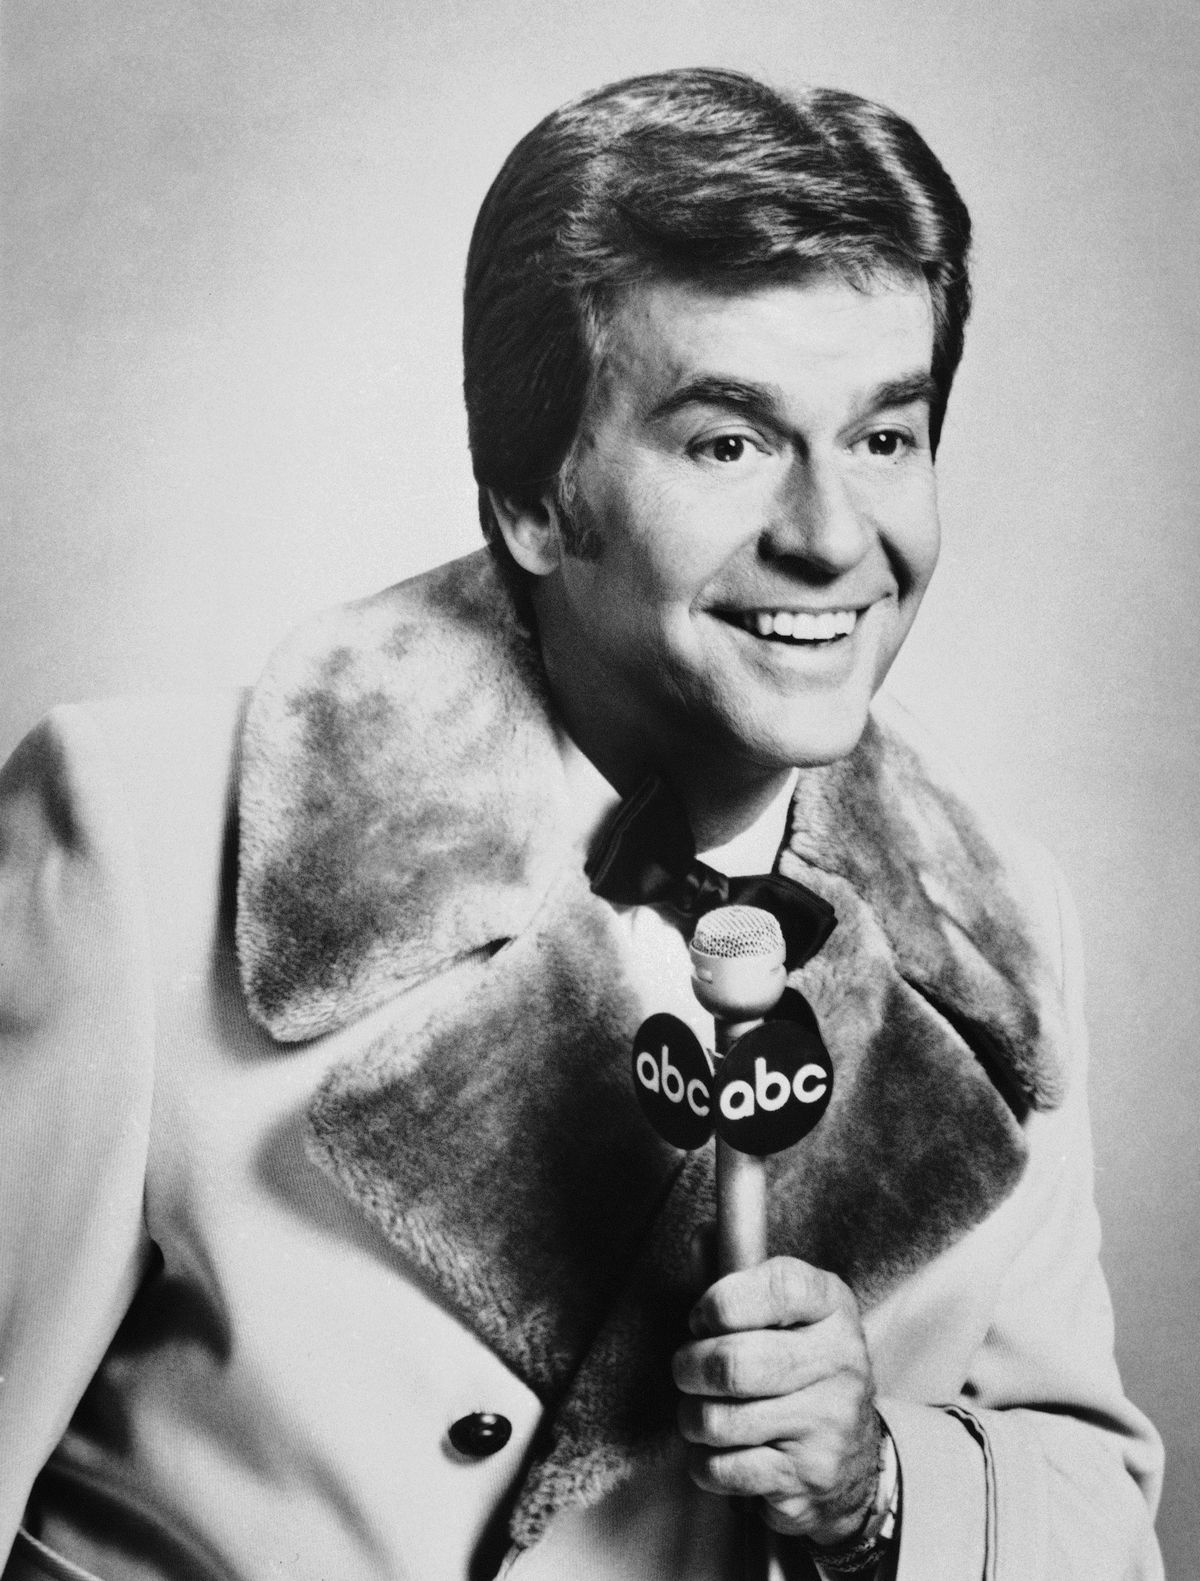 Dick Clark 82 Dies Of Heart Attack The Spokesman Review